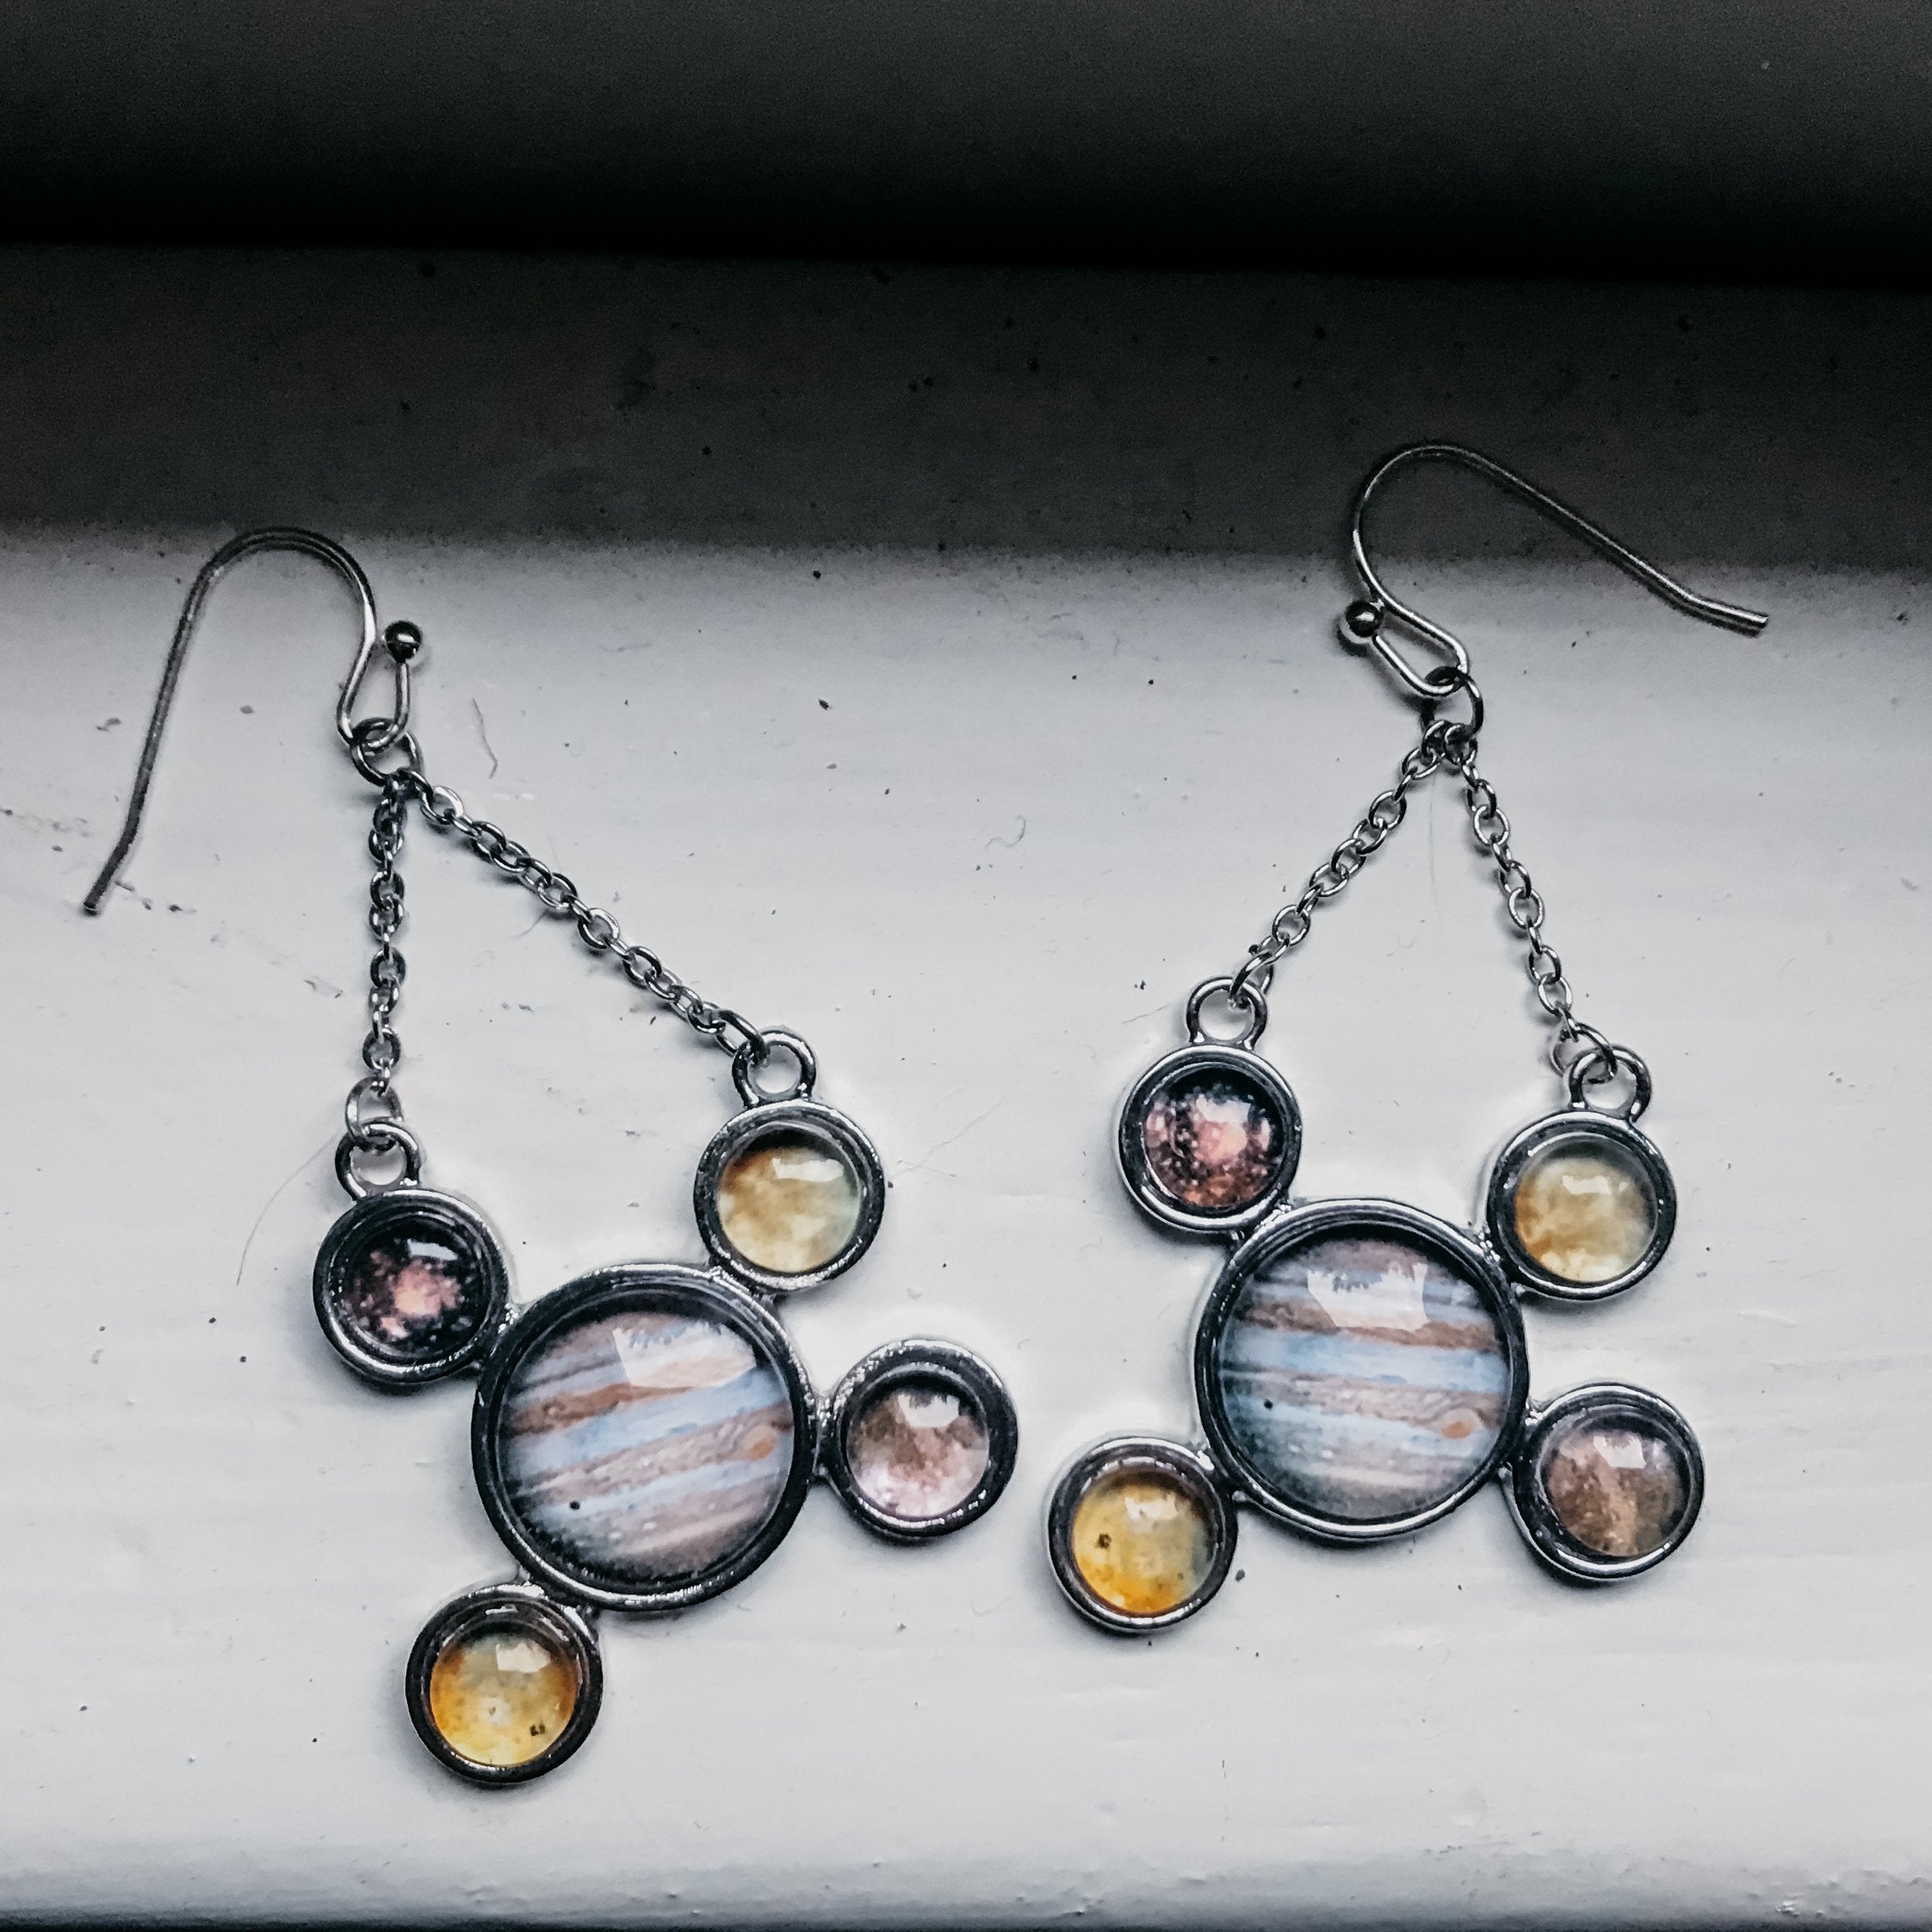 Jupiter and Galilean Moons Silver Dangle Earrings - Handcrafted Science Jewelry for Stargazers - Jewelry & Watches - Bijou Her -  -  - 